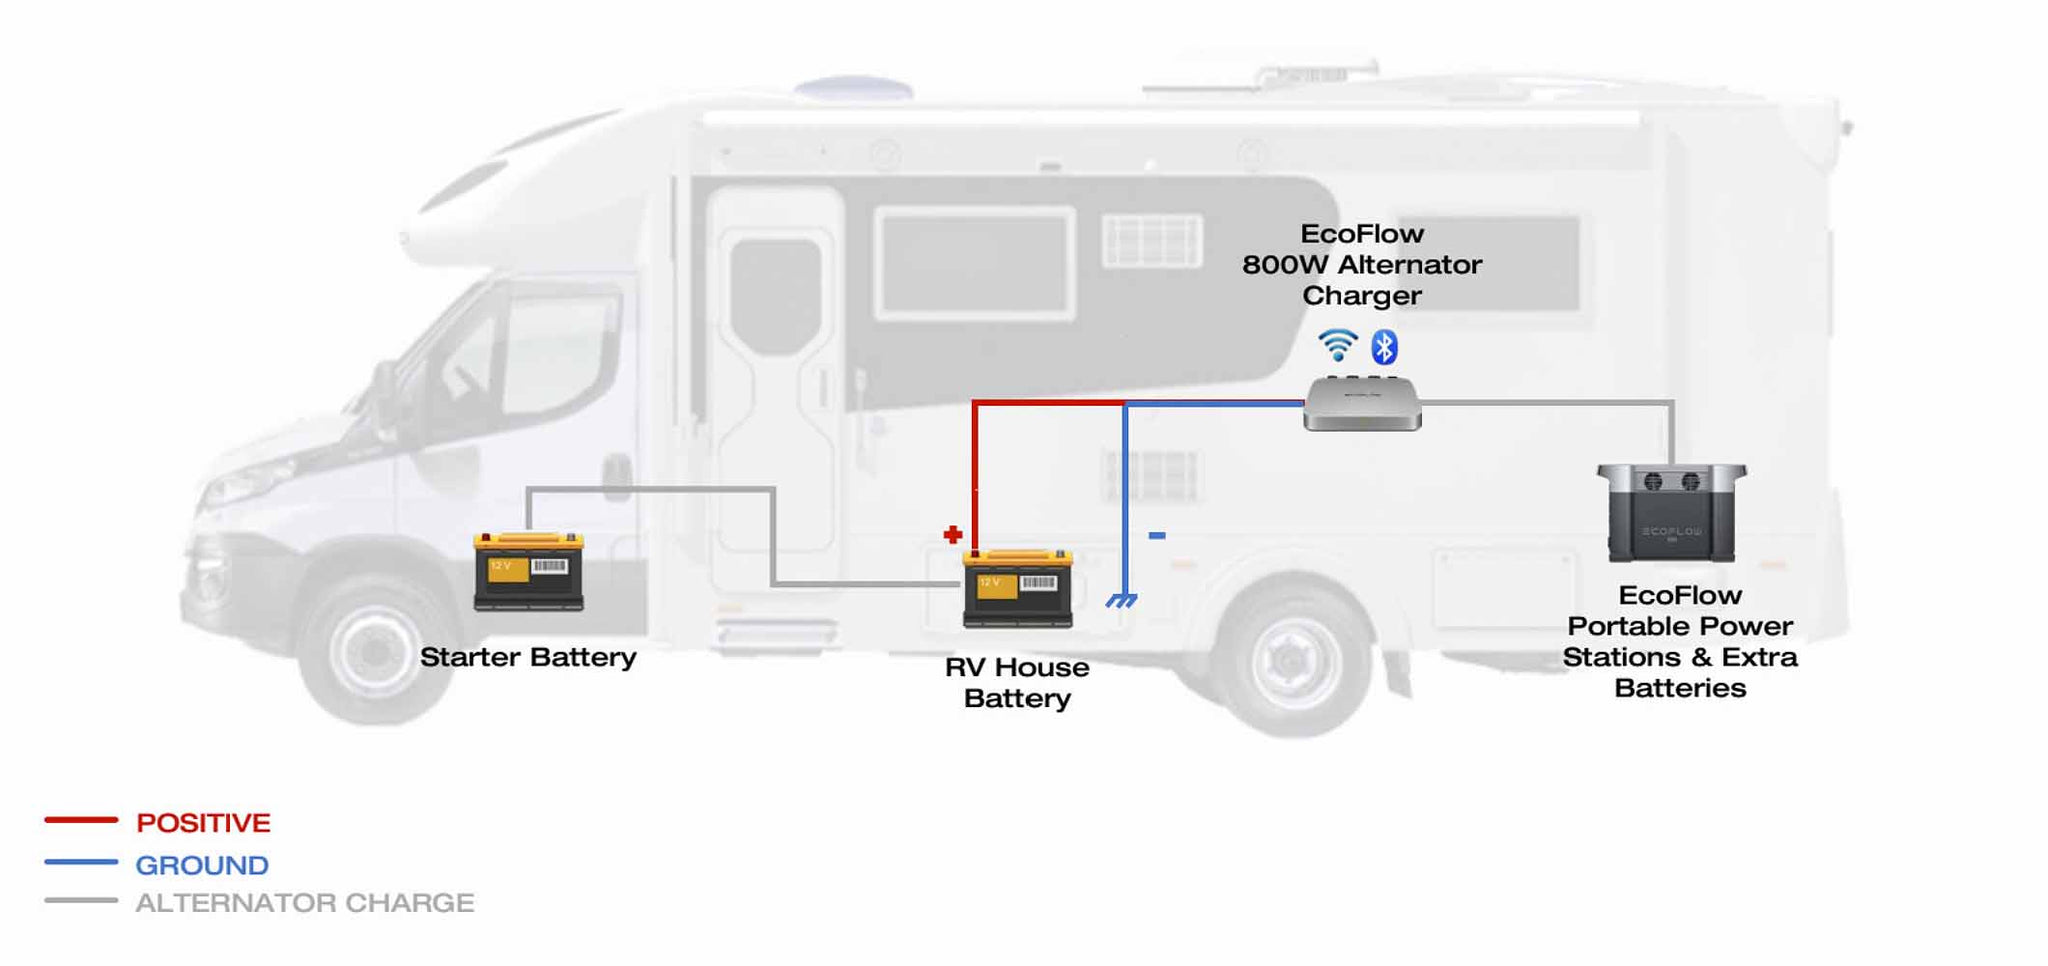 Wiring Diagram For The EcoFlow 800W Alternator Charger In A Motorhome